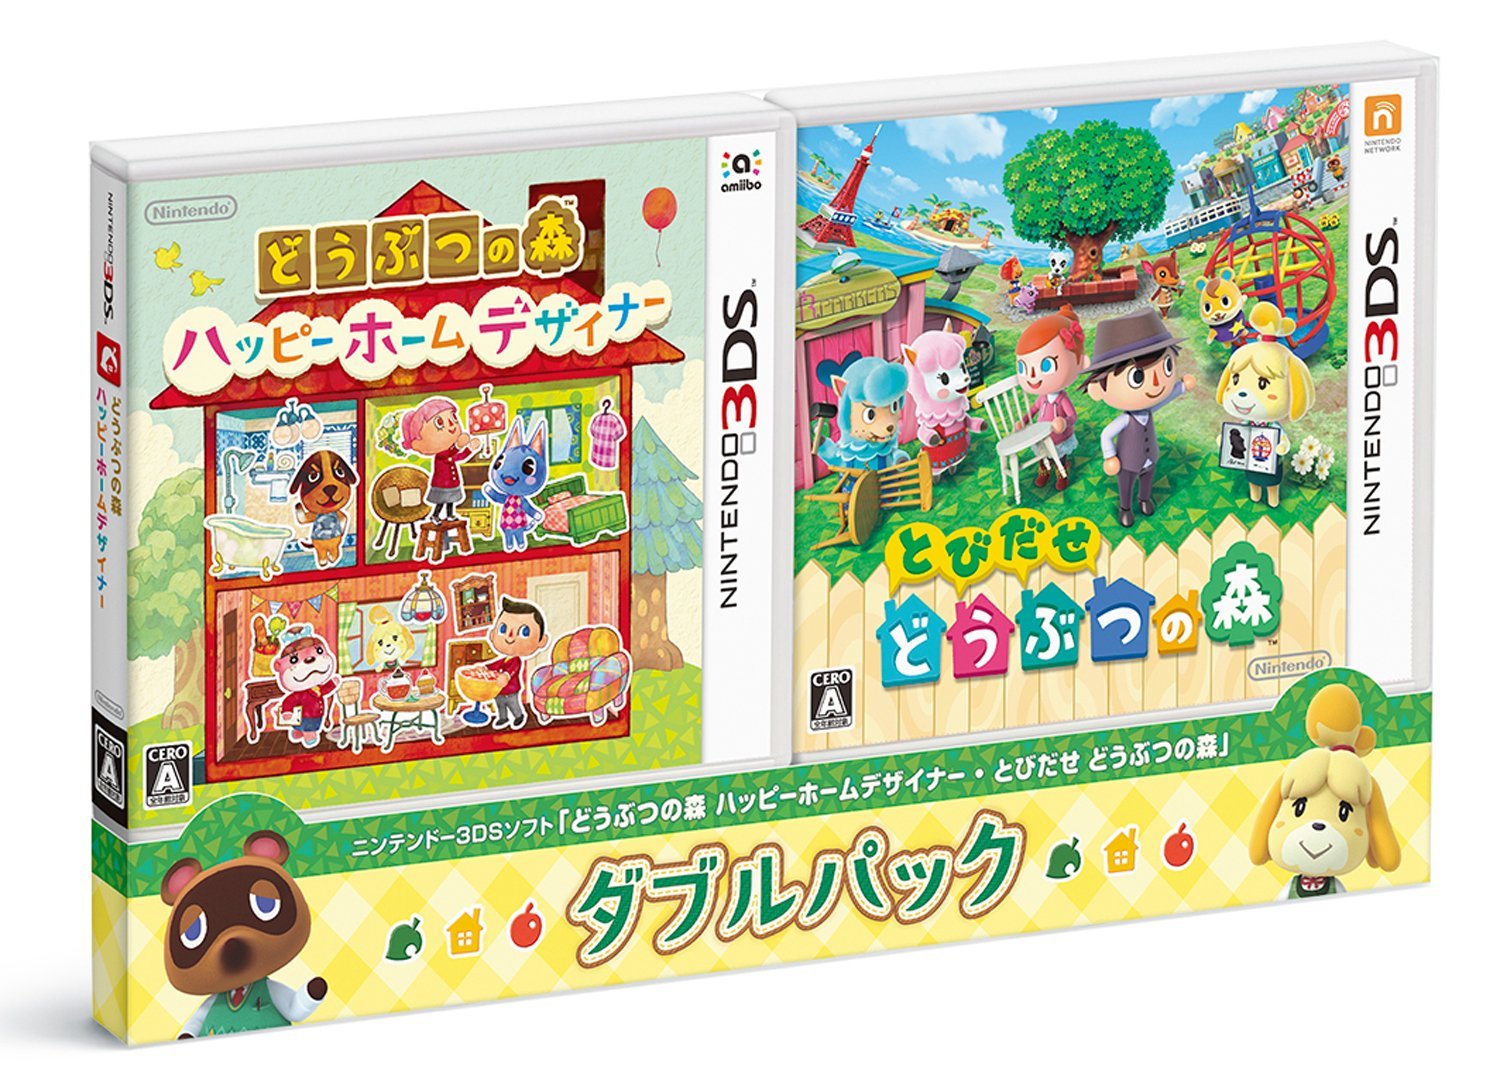 http://www.perfectly-nintendo.com/wp-content/gallery/japan-boxart-14-11-2015/8.jpg